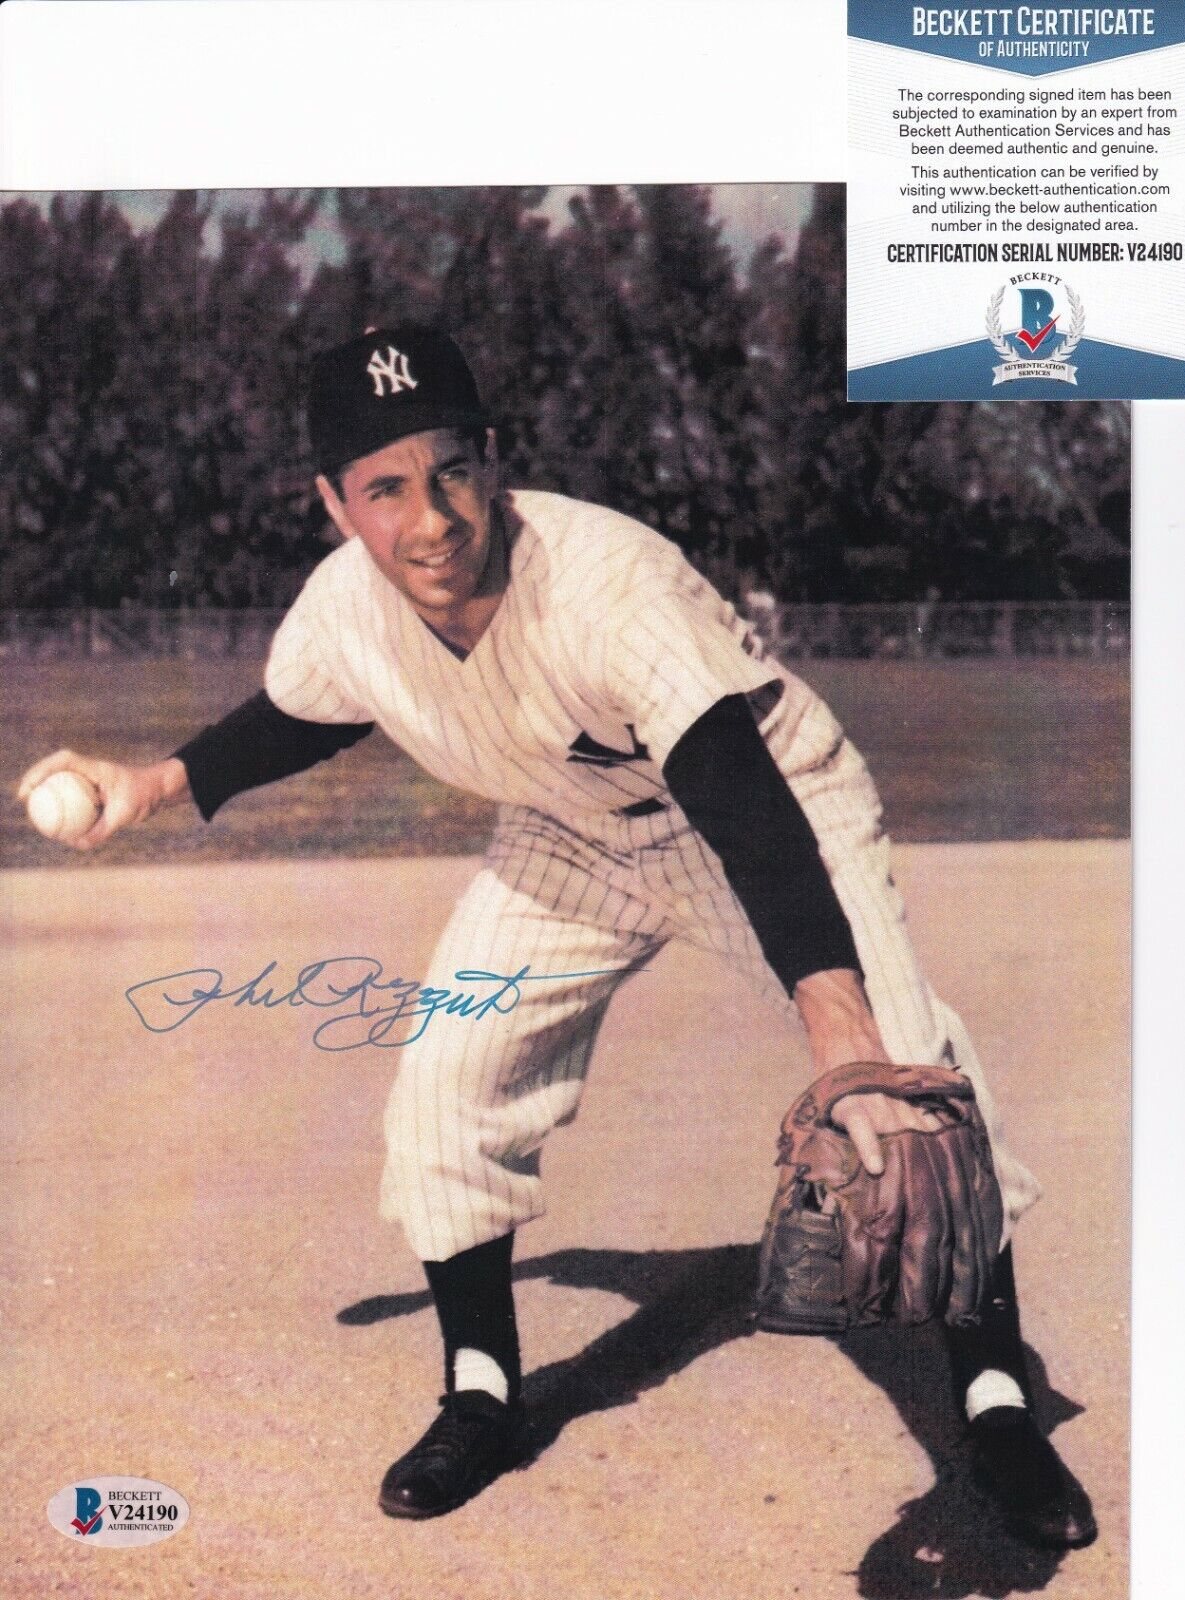 PHIL RIZZUTO signed (NEW YORK YANKEES) autographed 8X10 Photo Poster painting BECKETT V24190